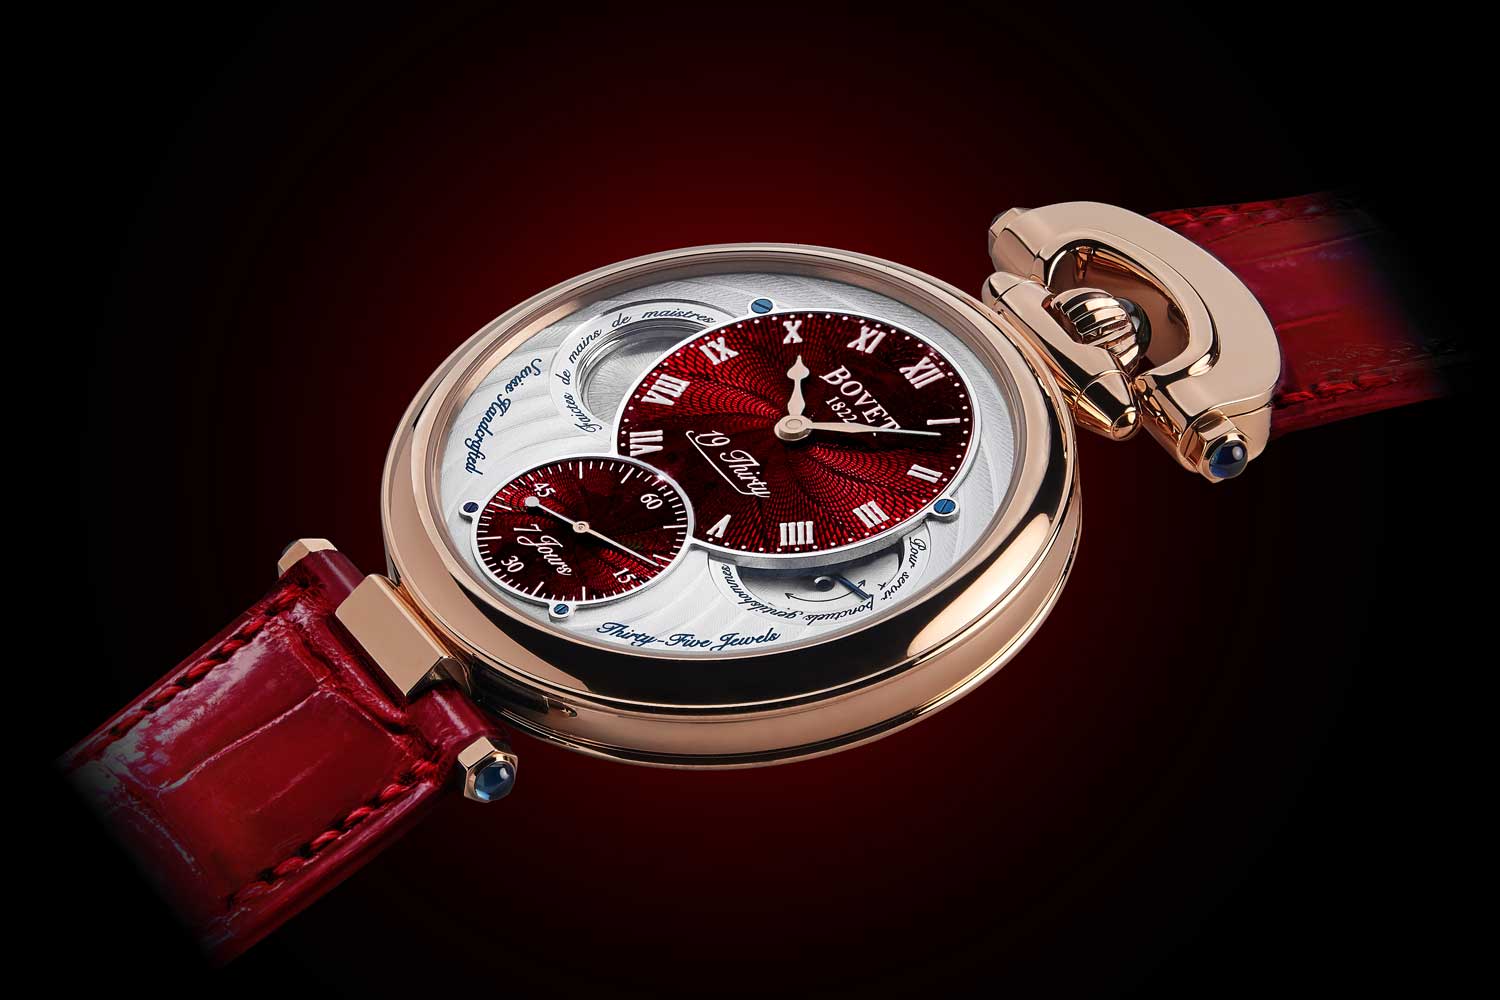 19Thirty’s Fleurier case is a symbol of two centuries of watchmaking excellence